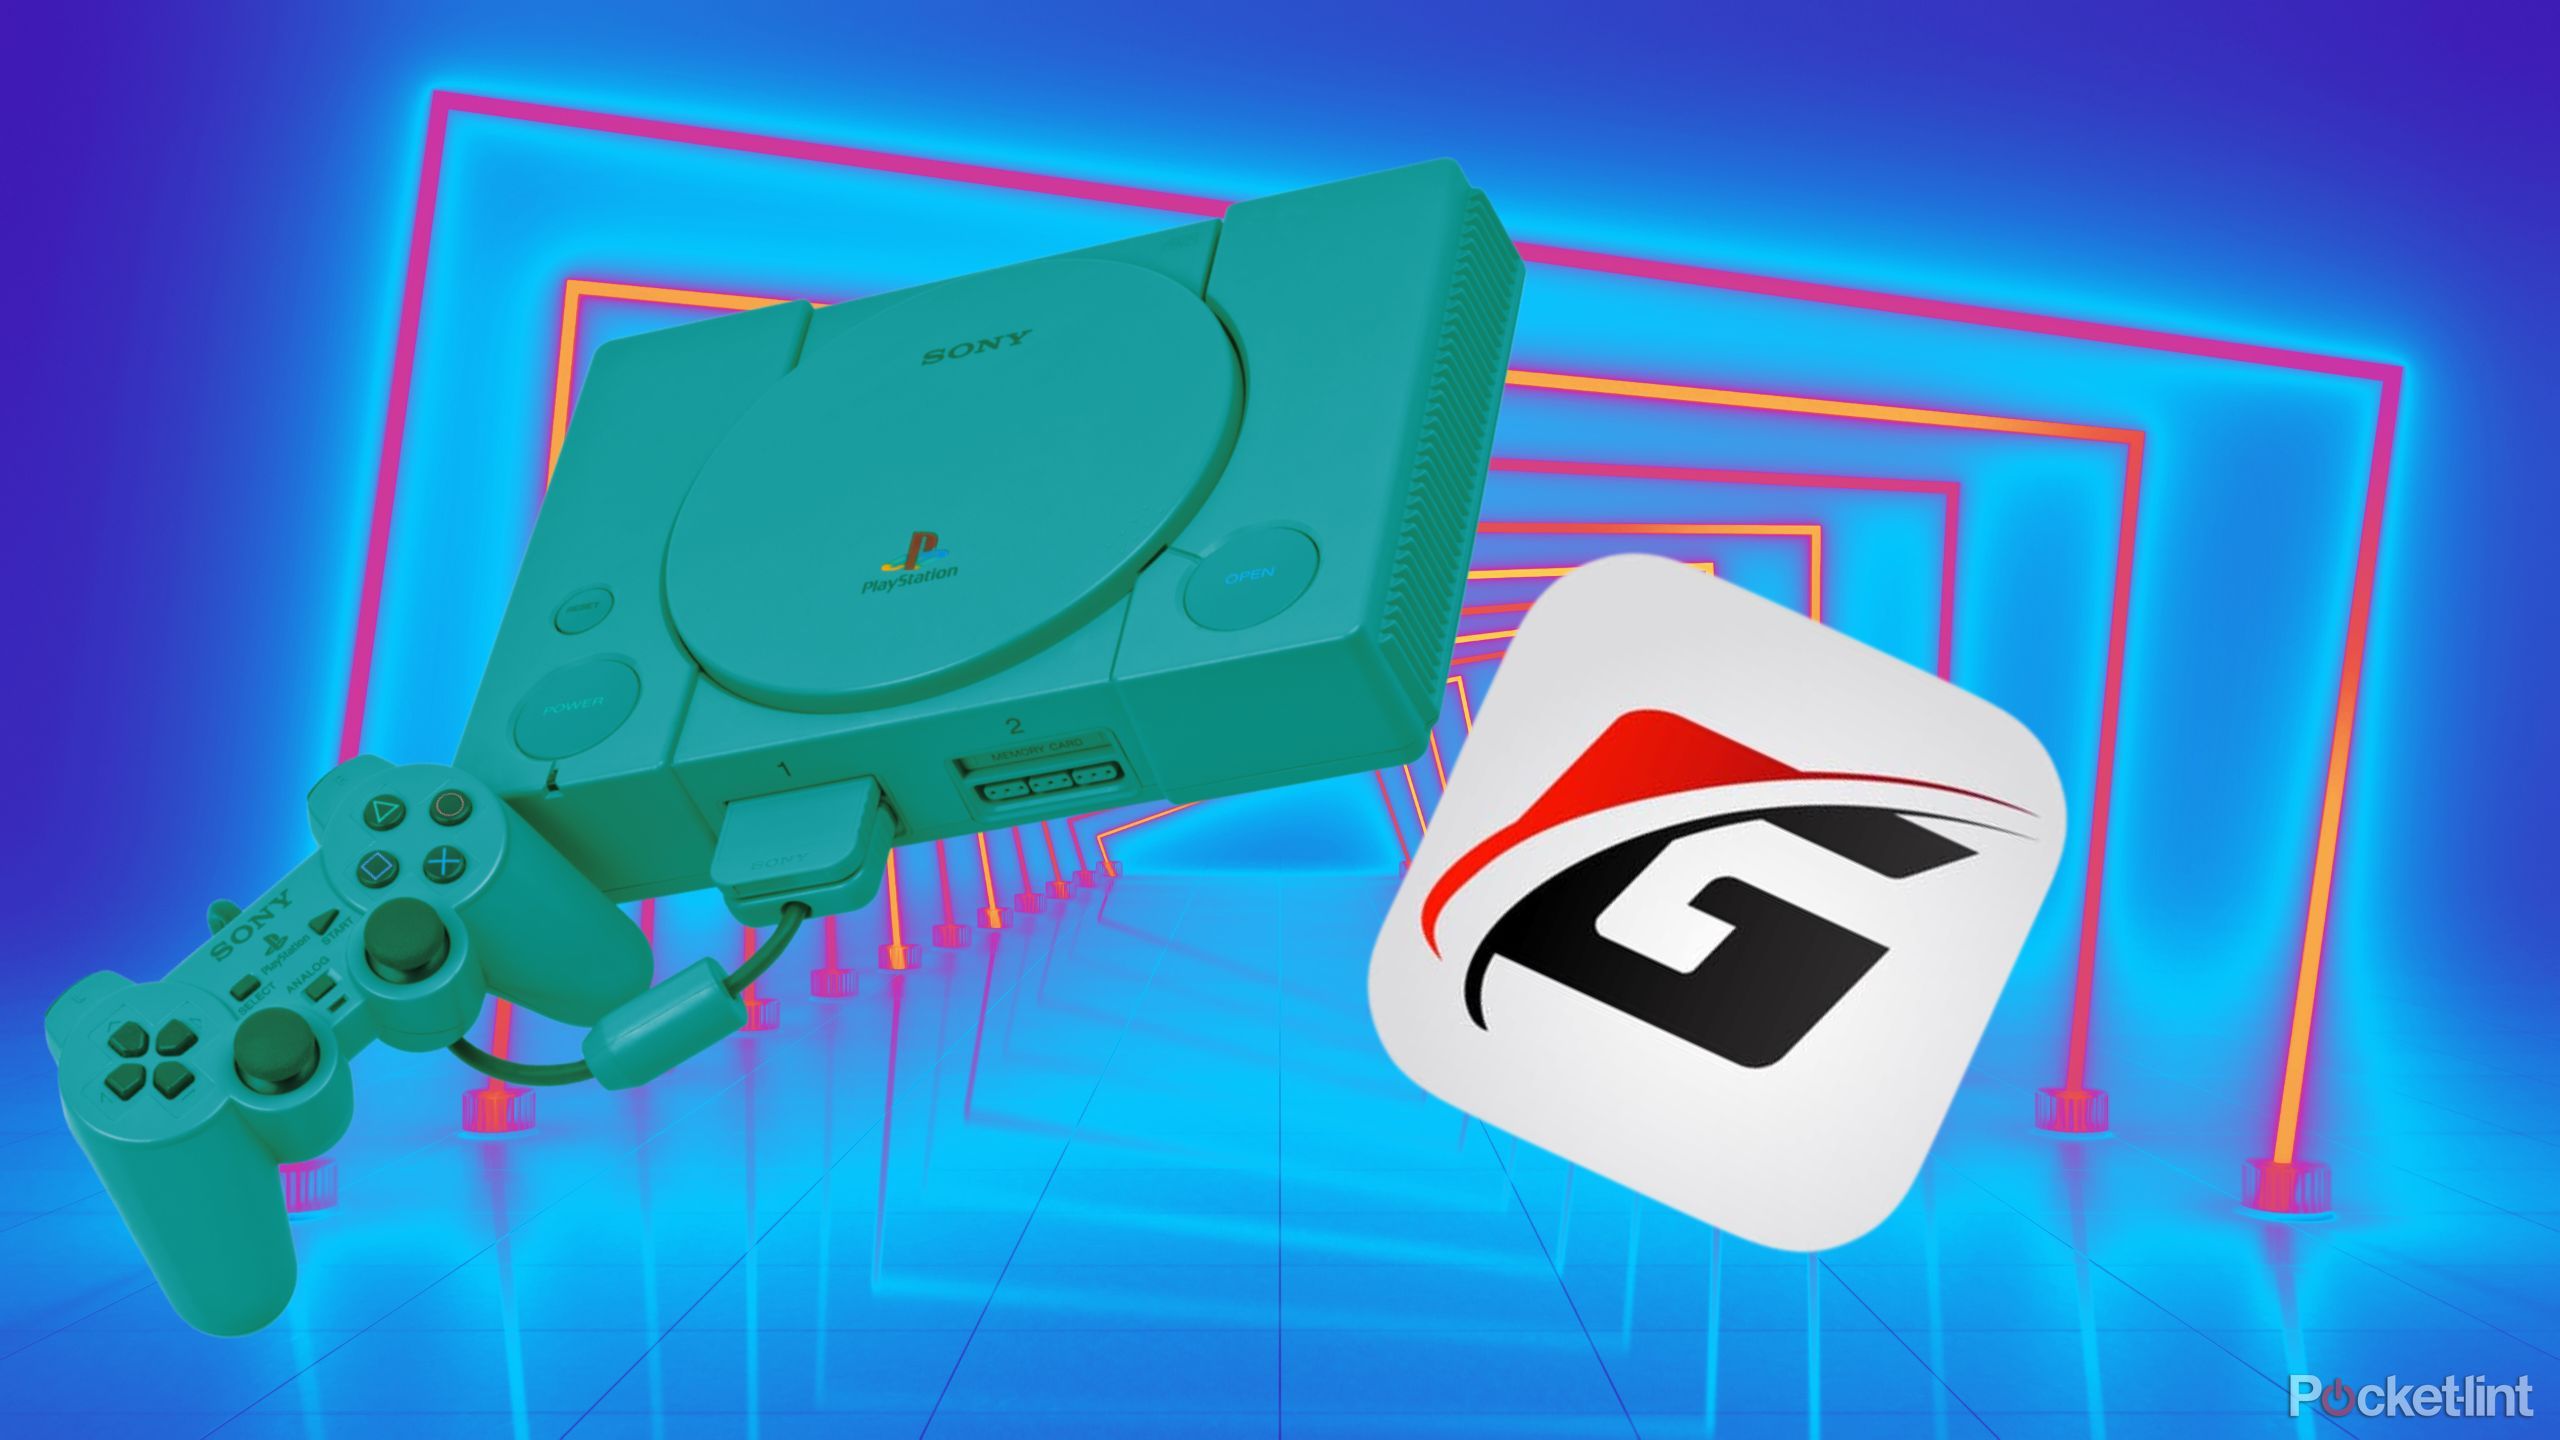 How to use the Gamma emulator to play PS1 games on your iPhone